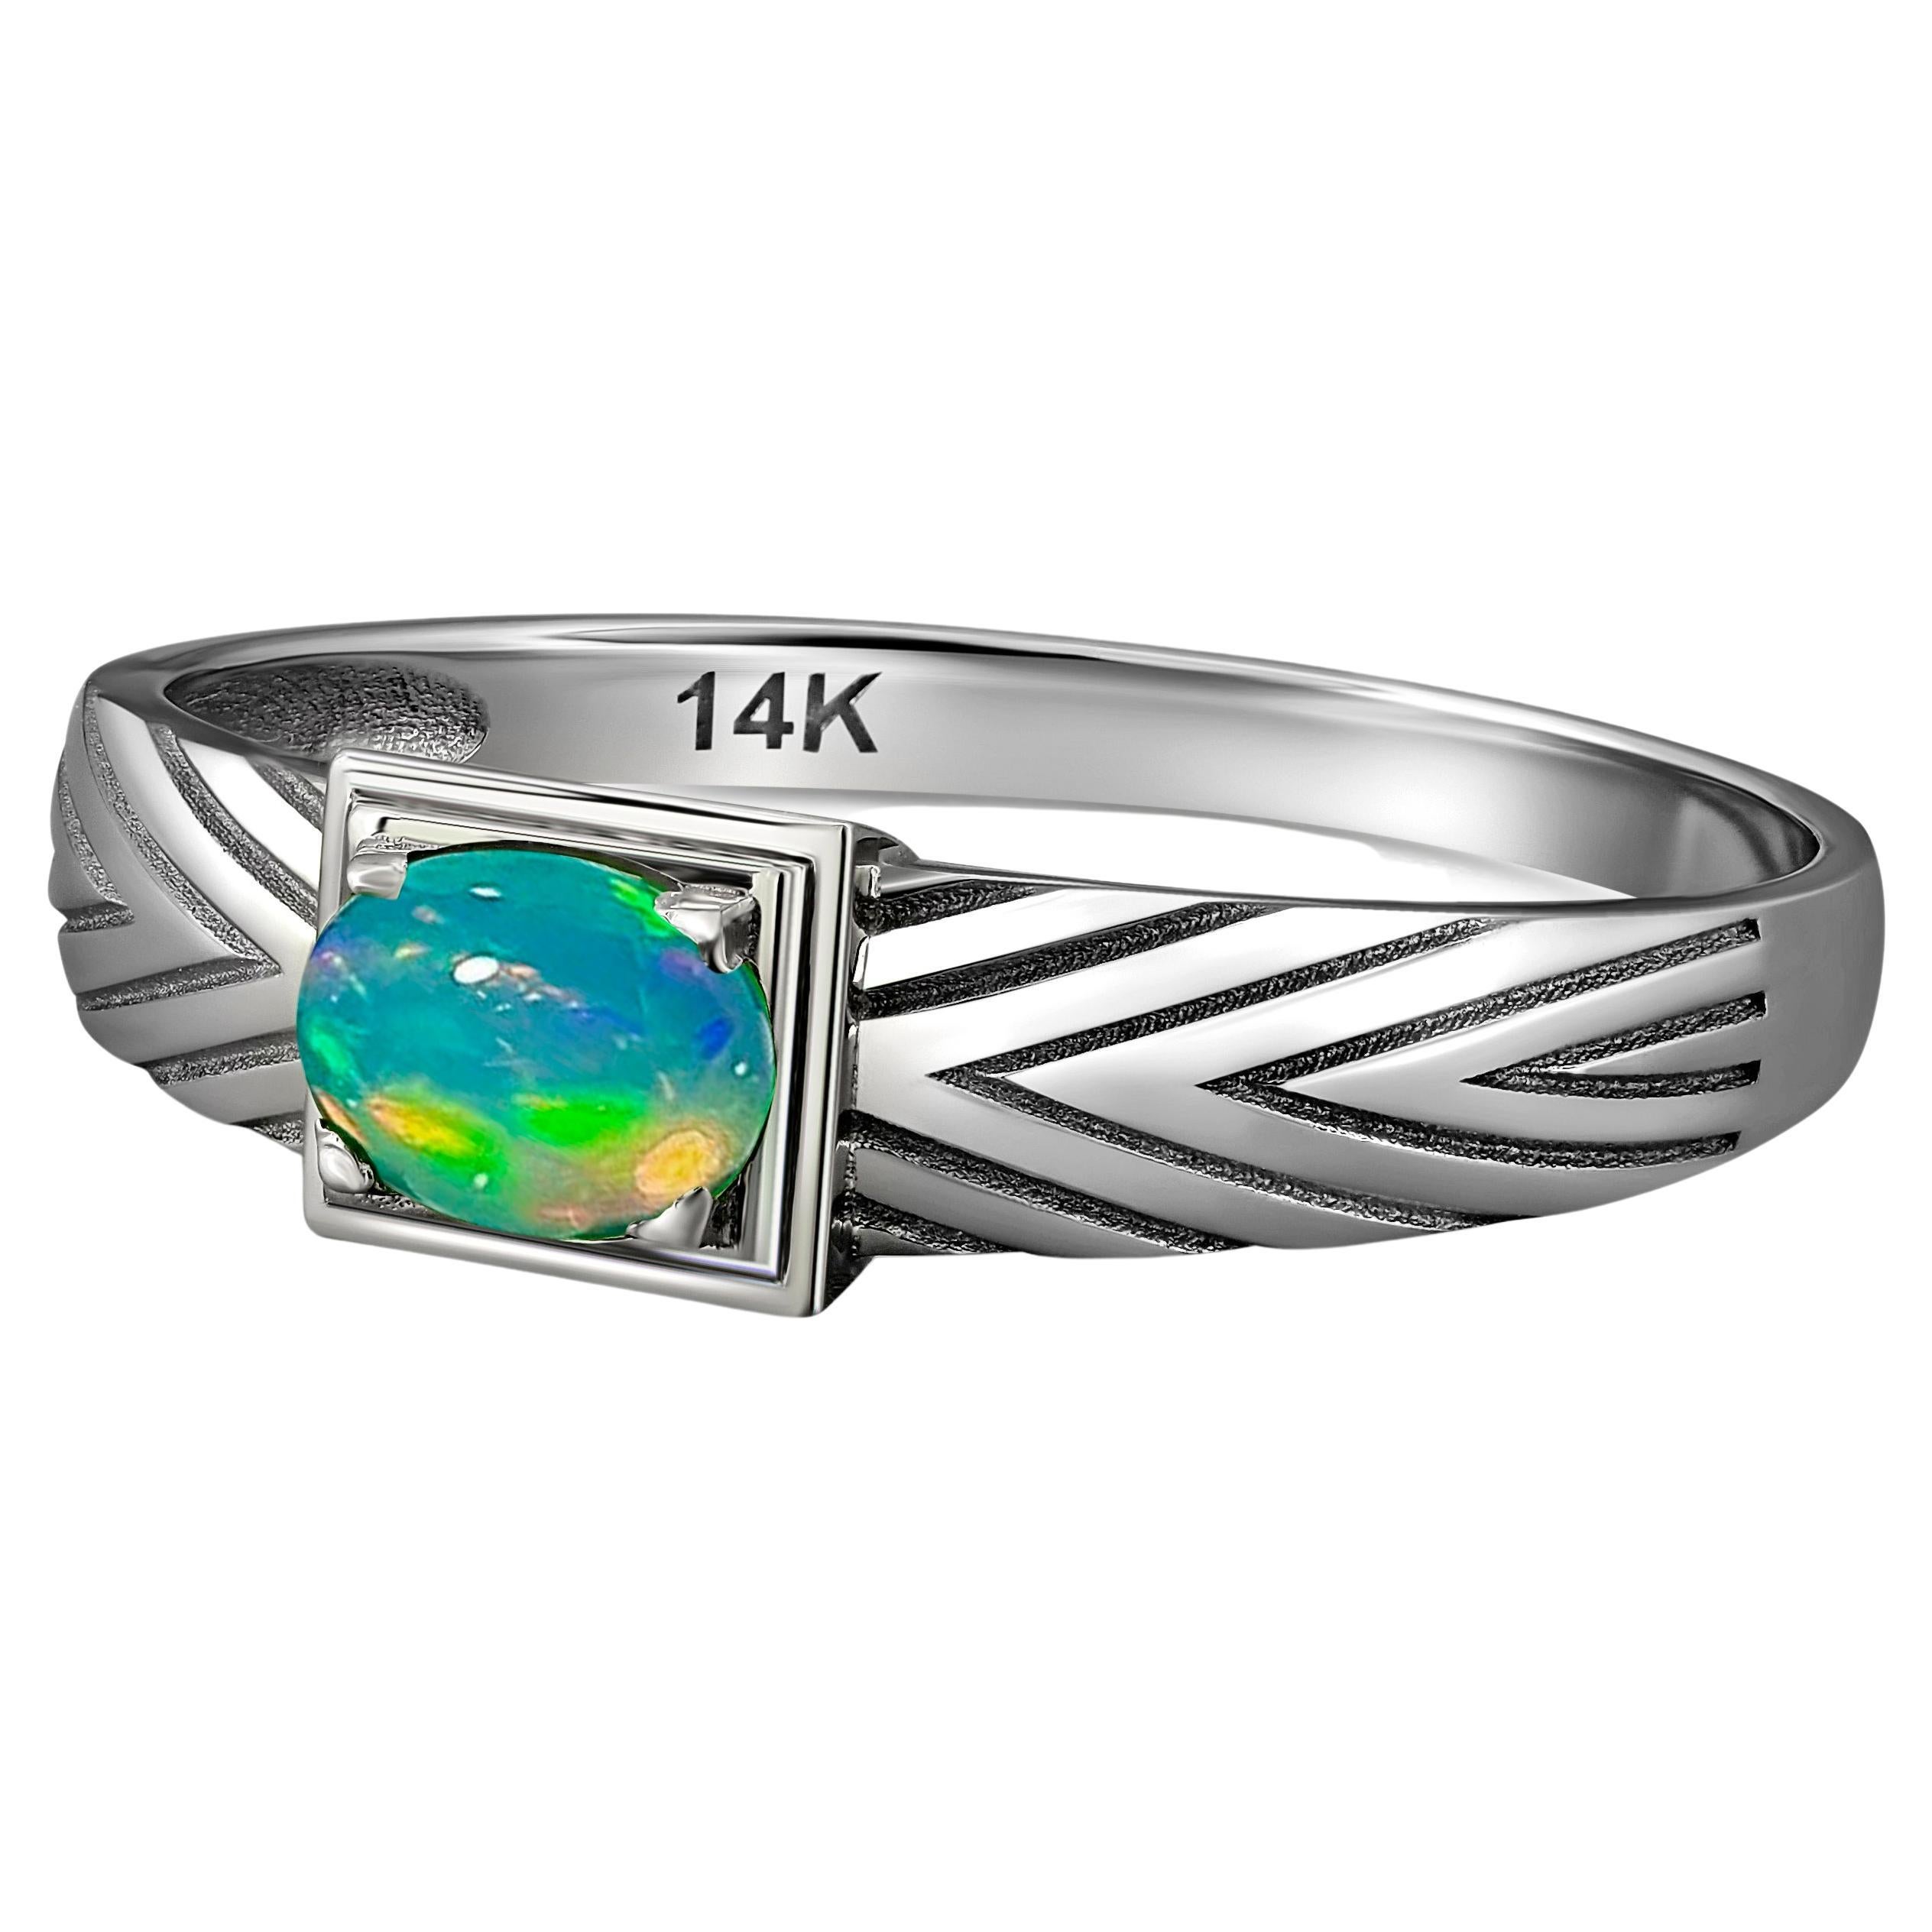 14k Gold Mens Ring with Opal, Gold Ring for Men with Opal